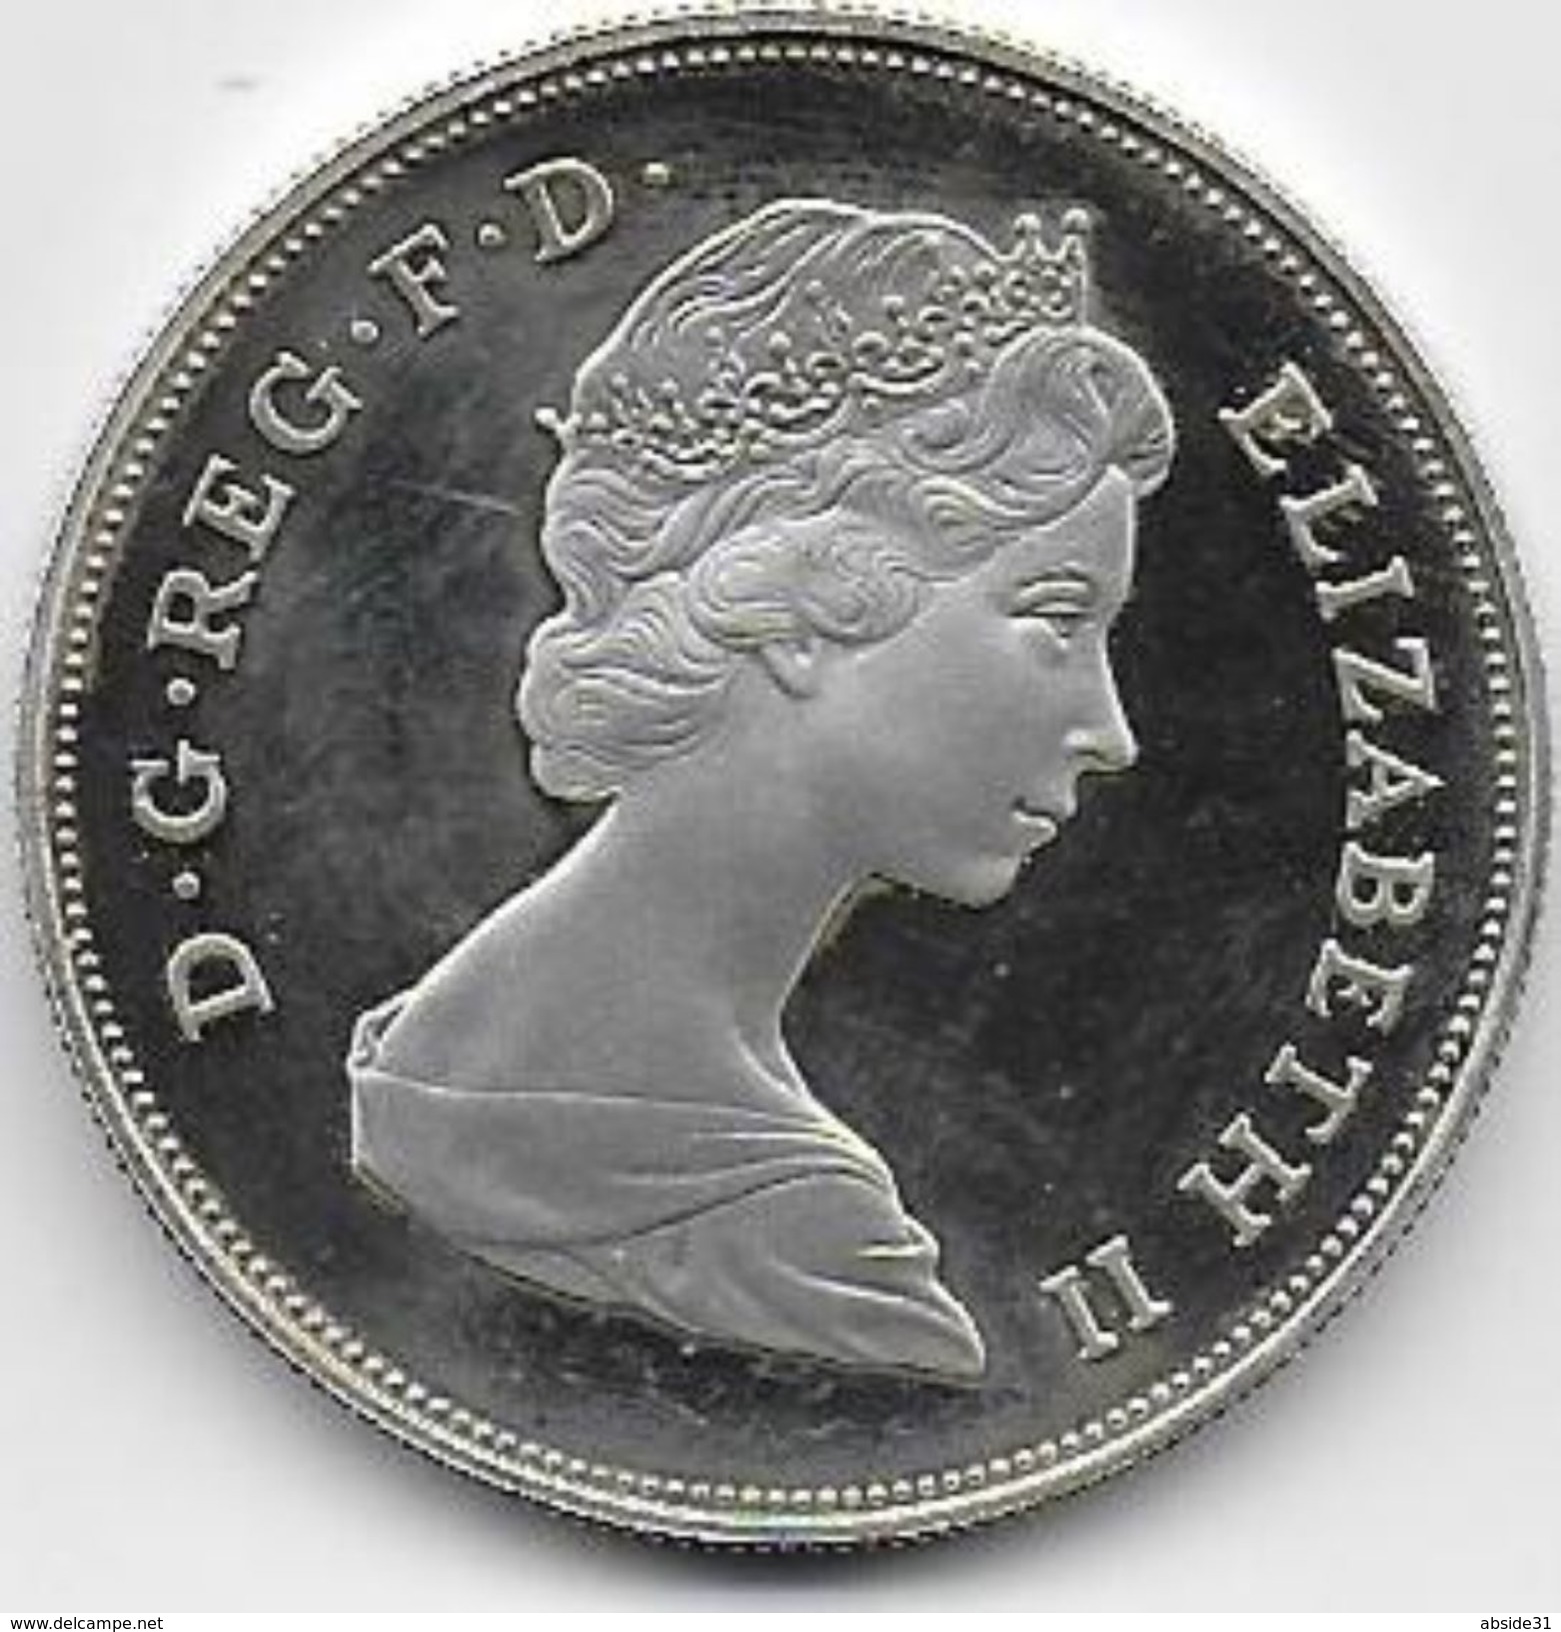 Queen Elizabeth The Queen Mother   1980 ( Proof Silver ) - Maundy Sets & Commemorative